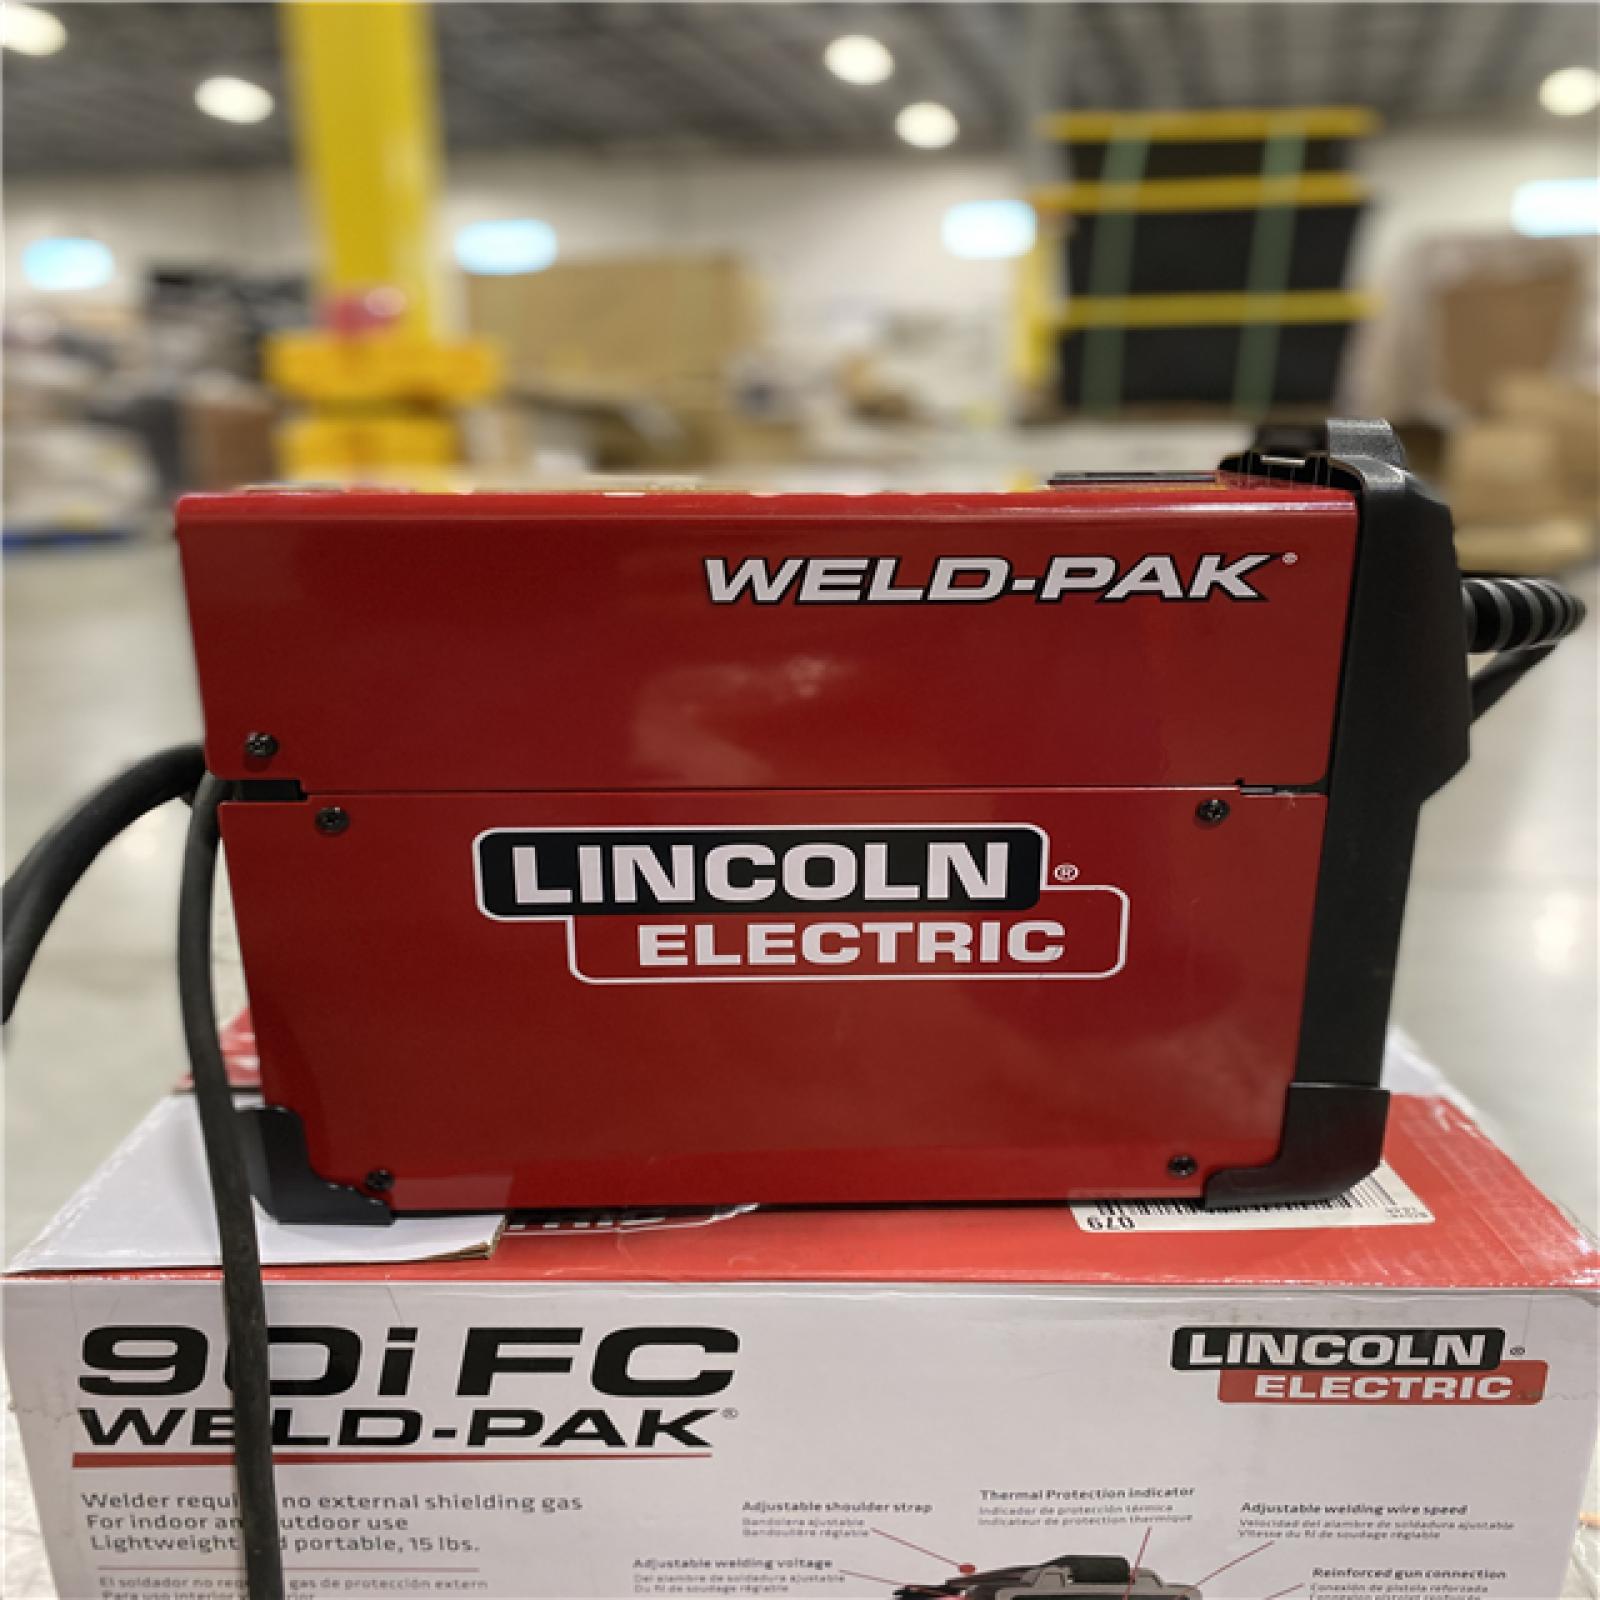 AS-IS - Lincoln Electric WELD-PAK 90i FC Flux-Cored Wire Feeder Welder